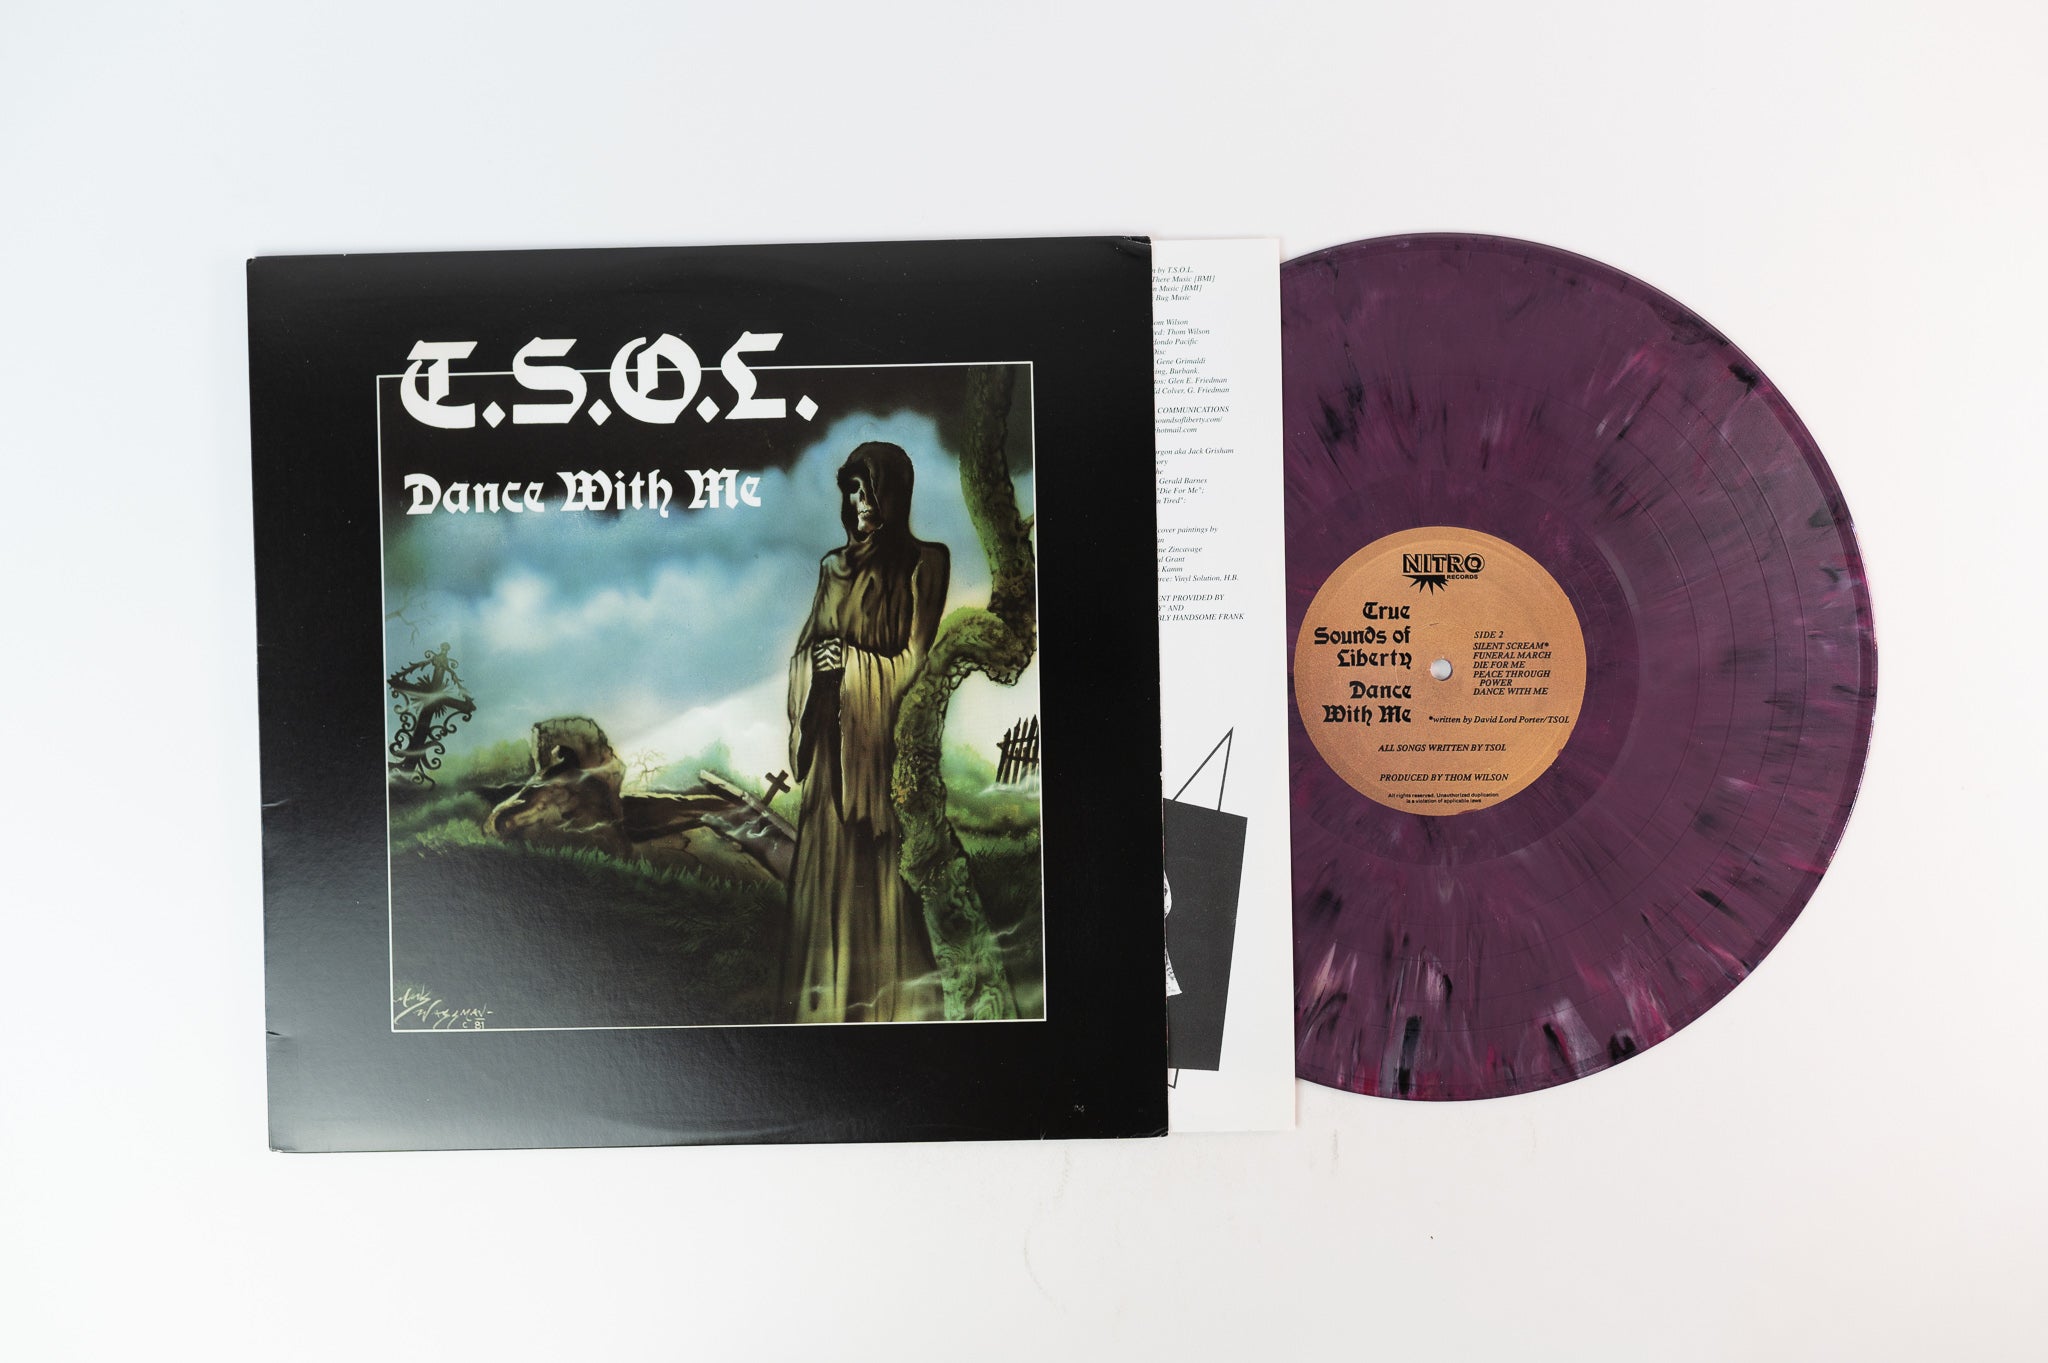 T.S.O.L. - Dance With Me on Nitro Purple Marbled Vinyl Reissue